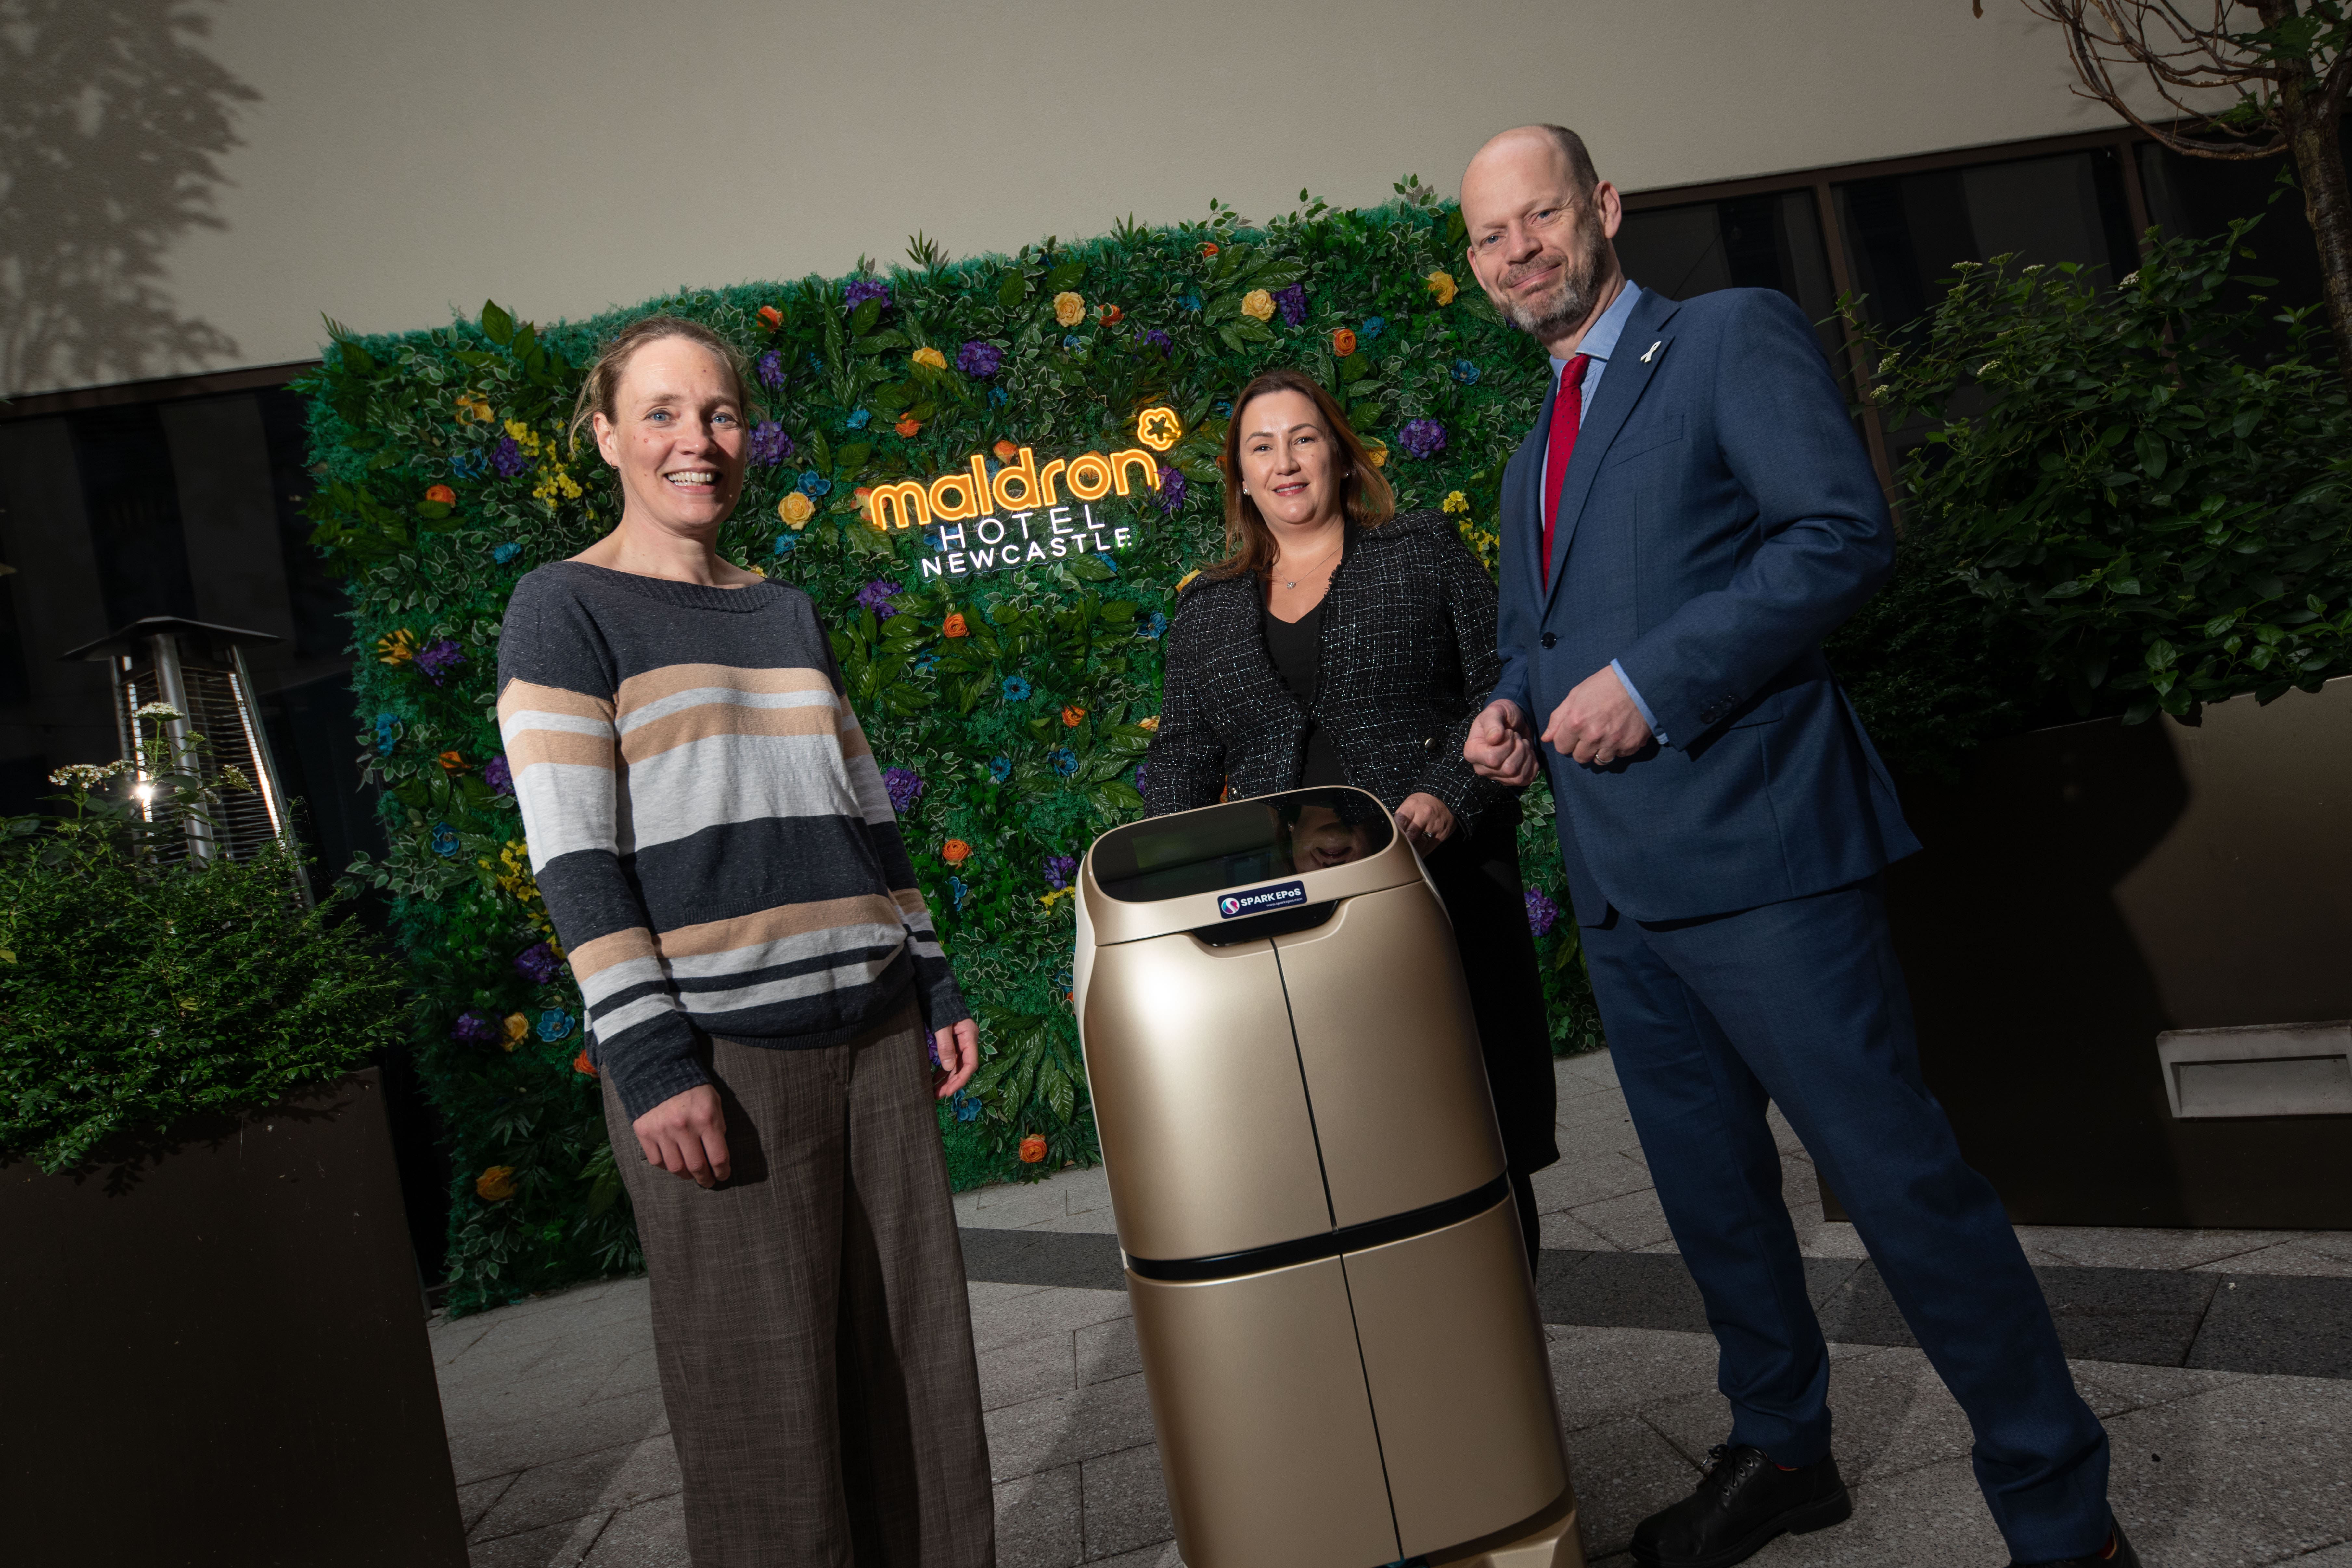 Shona, Anna and Jamie stood around the robot with background of greenery and Maldron logo